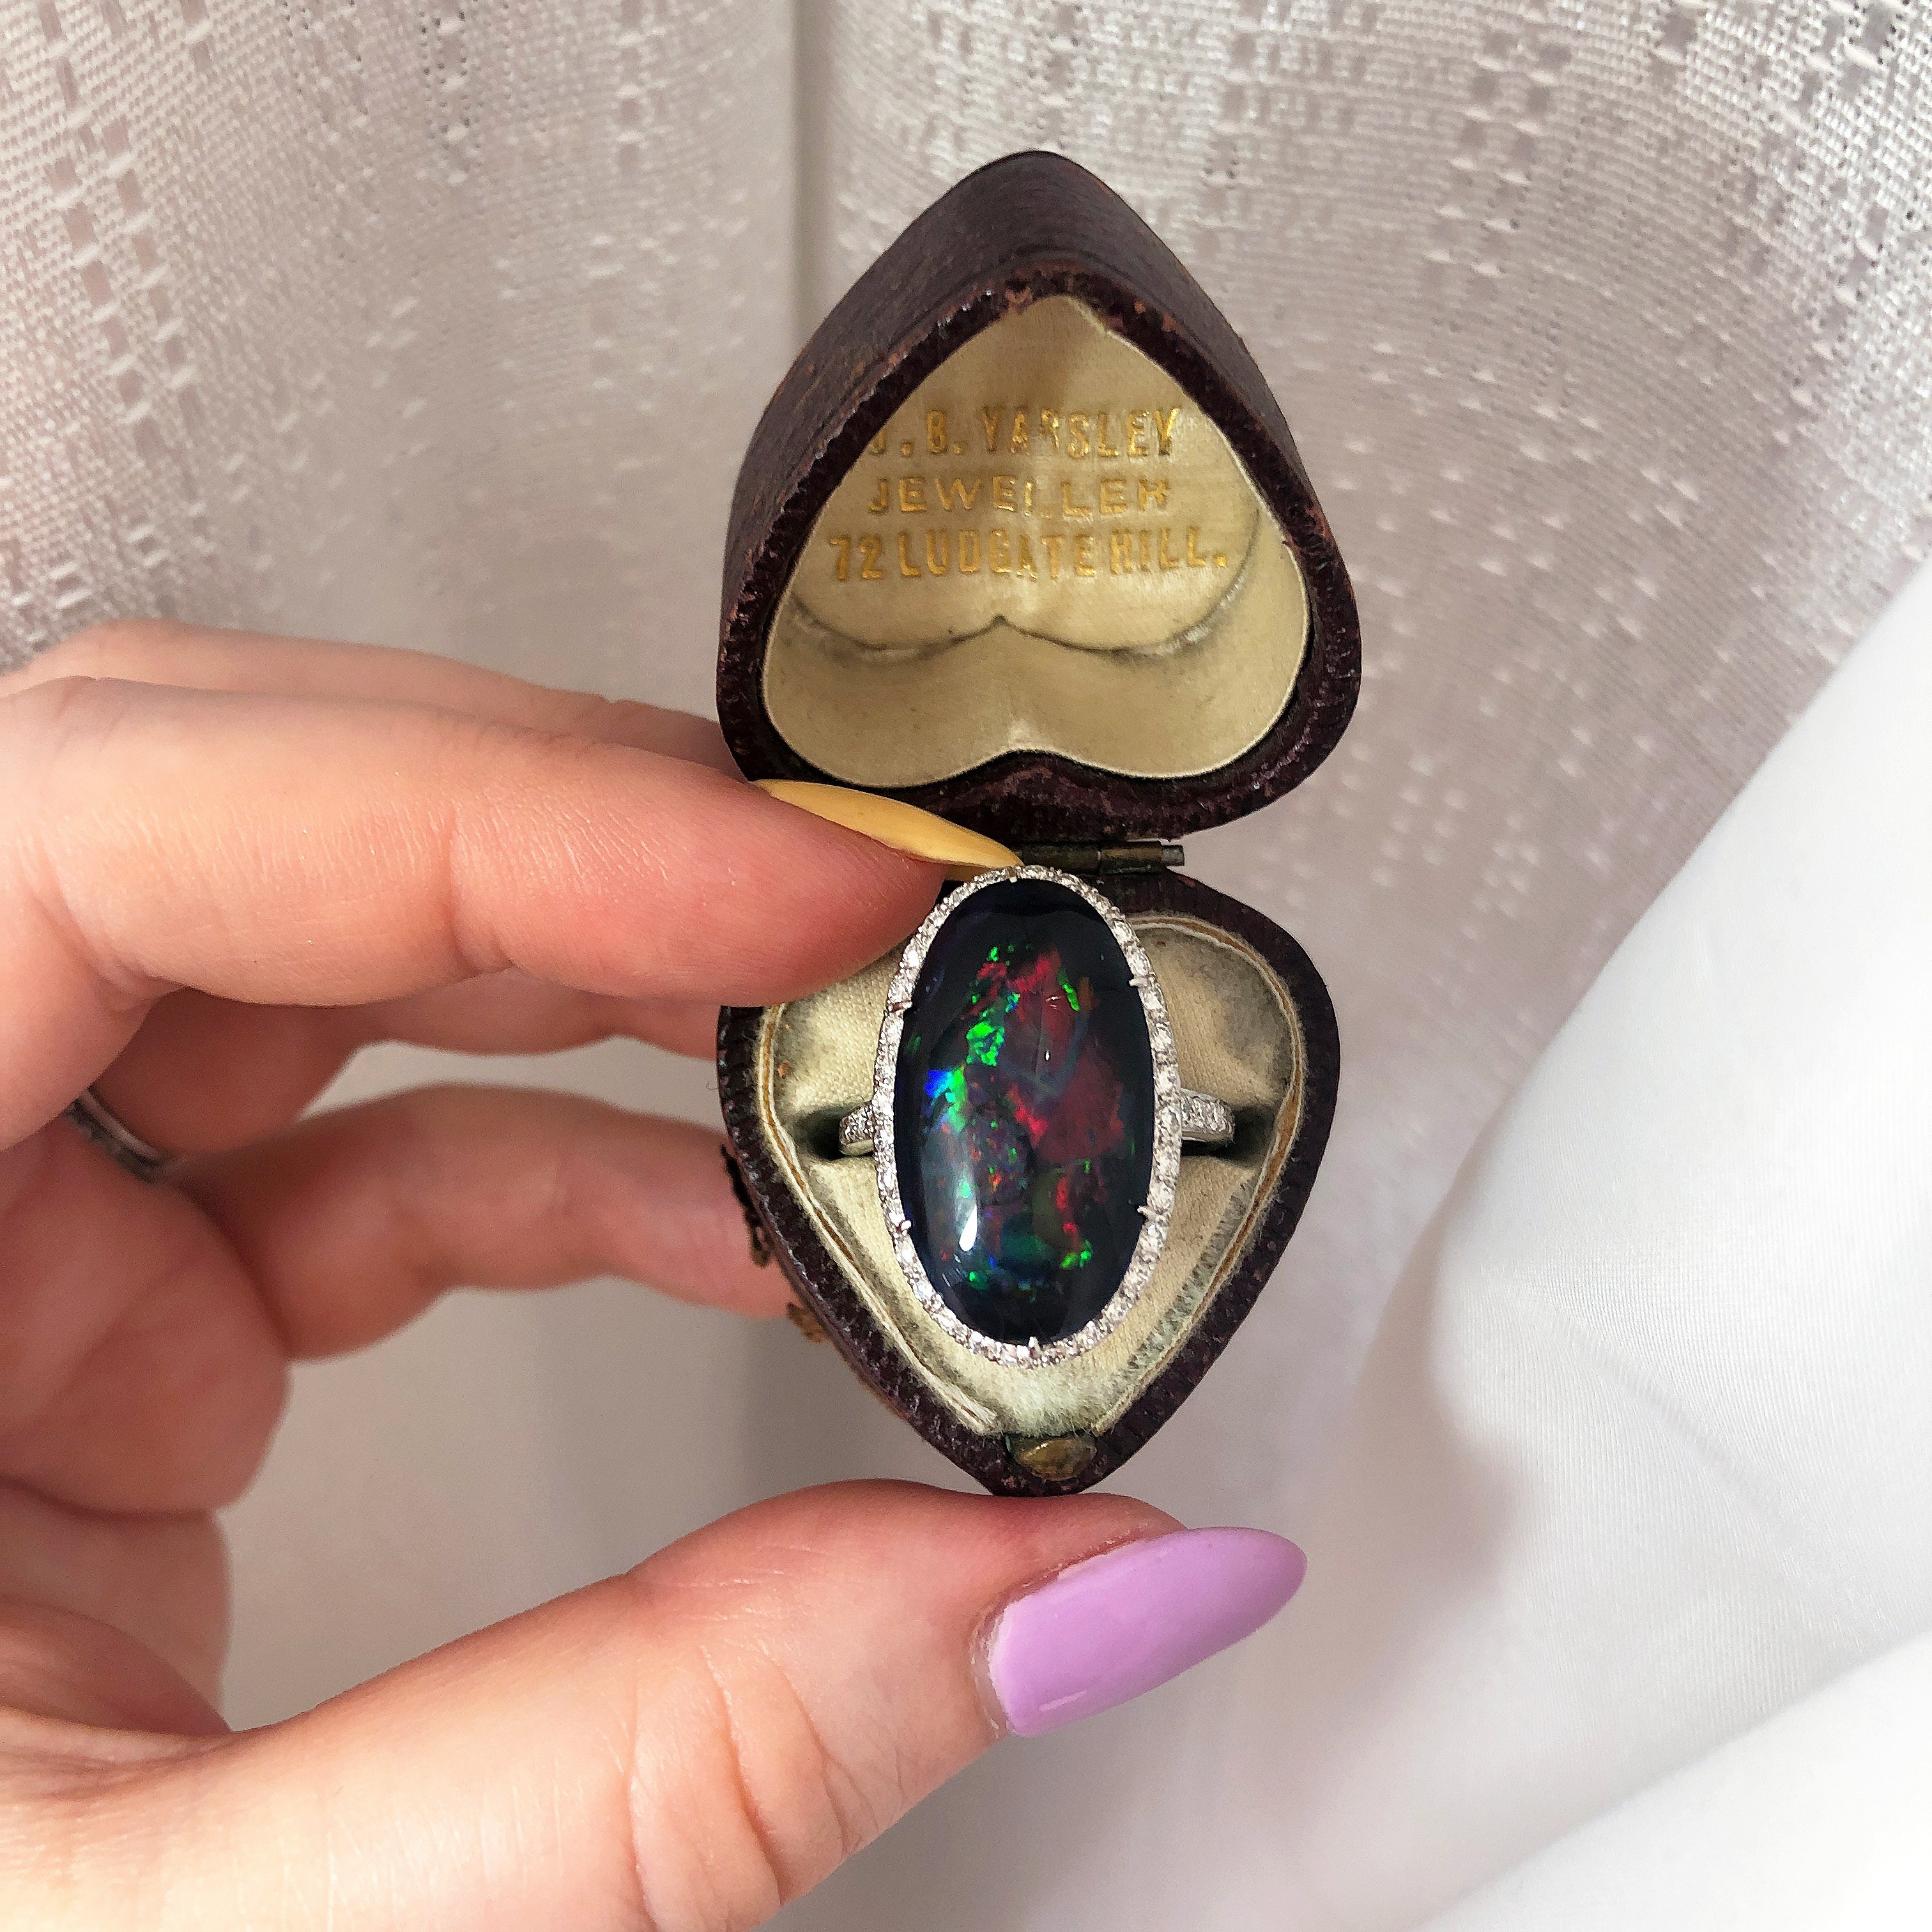 A rare and beautiful Edwardian era black opal ring from Under the Crown jewelry.